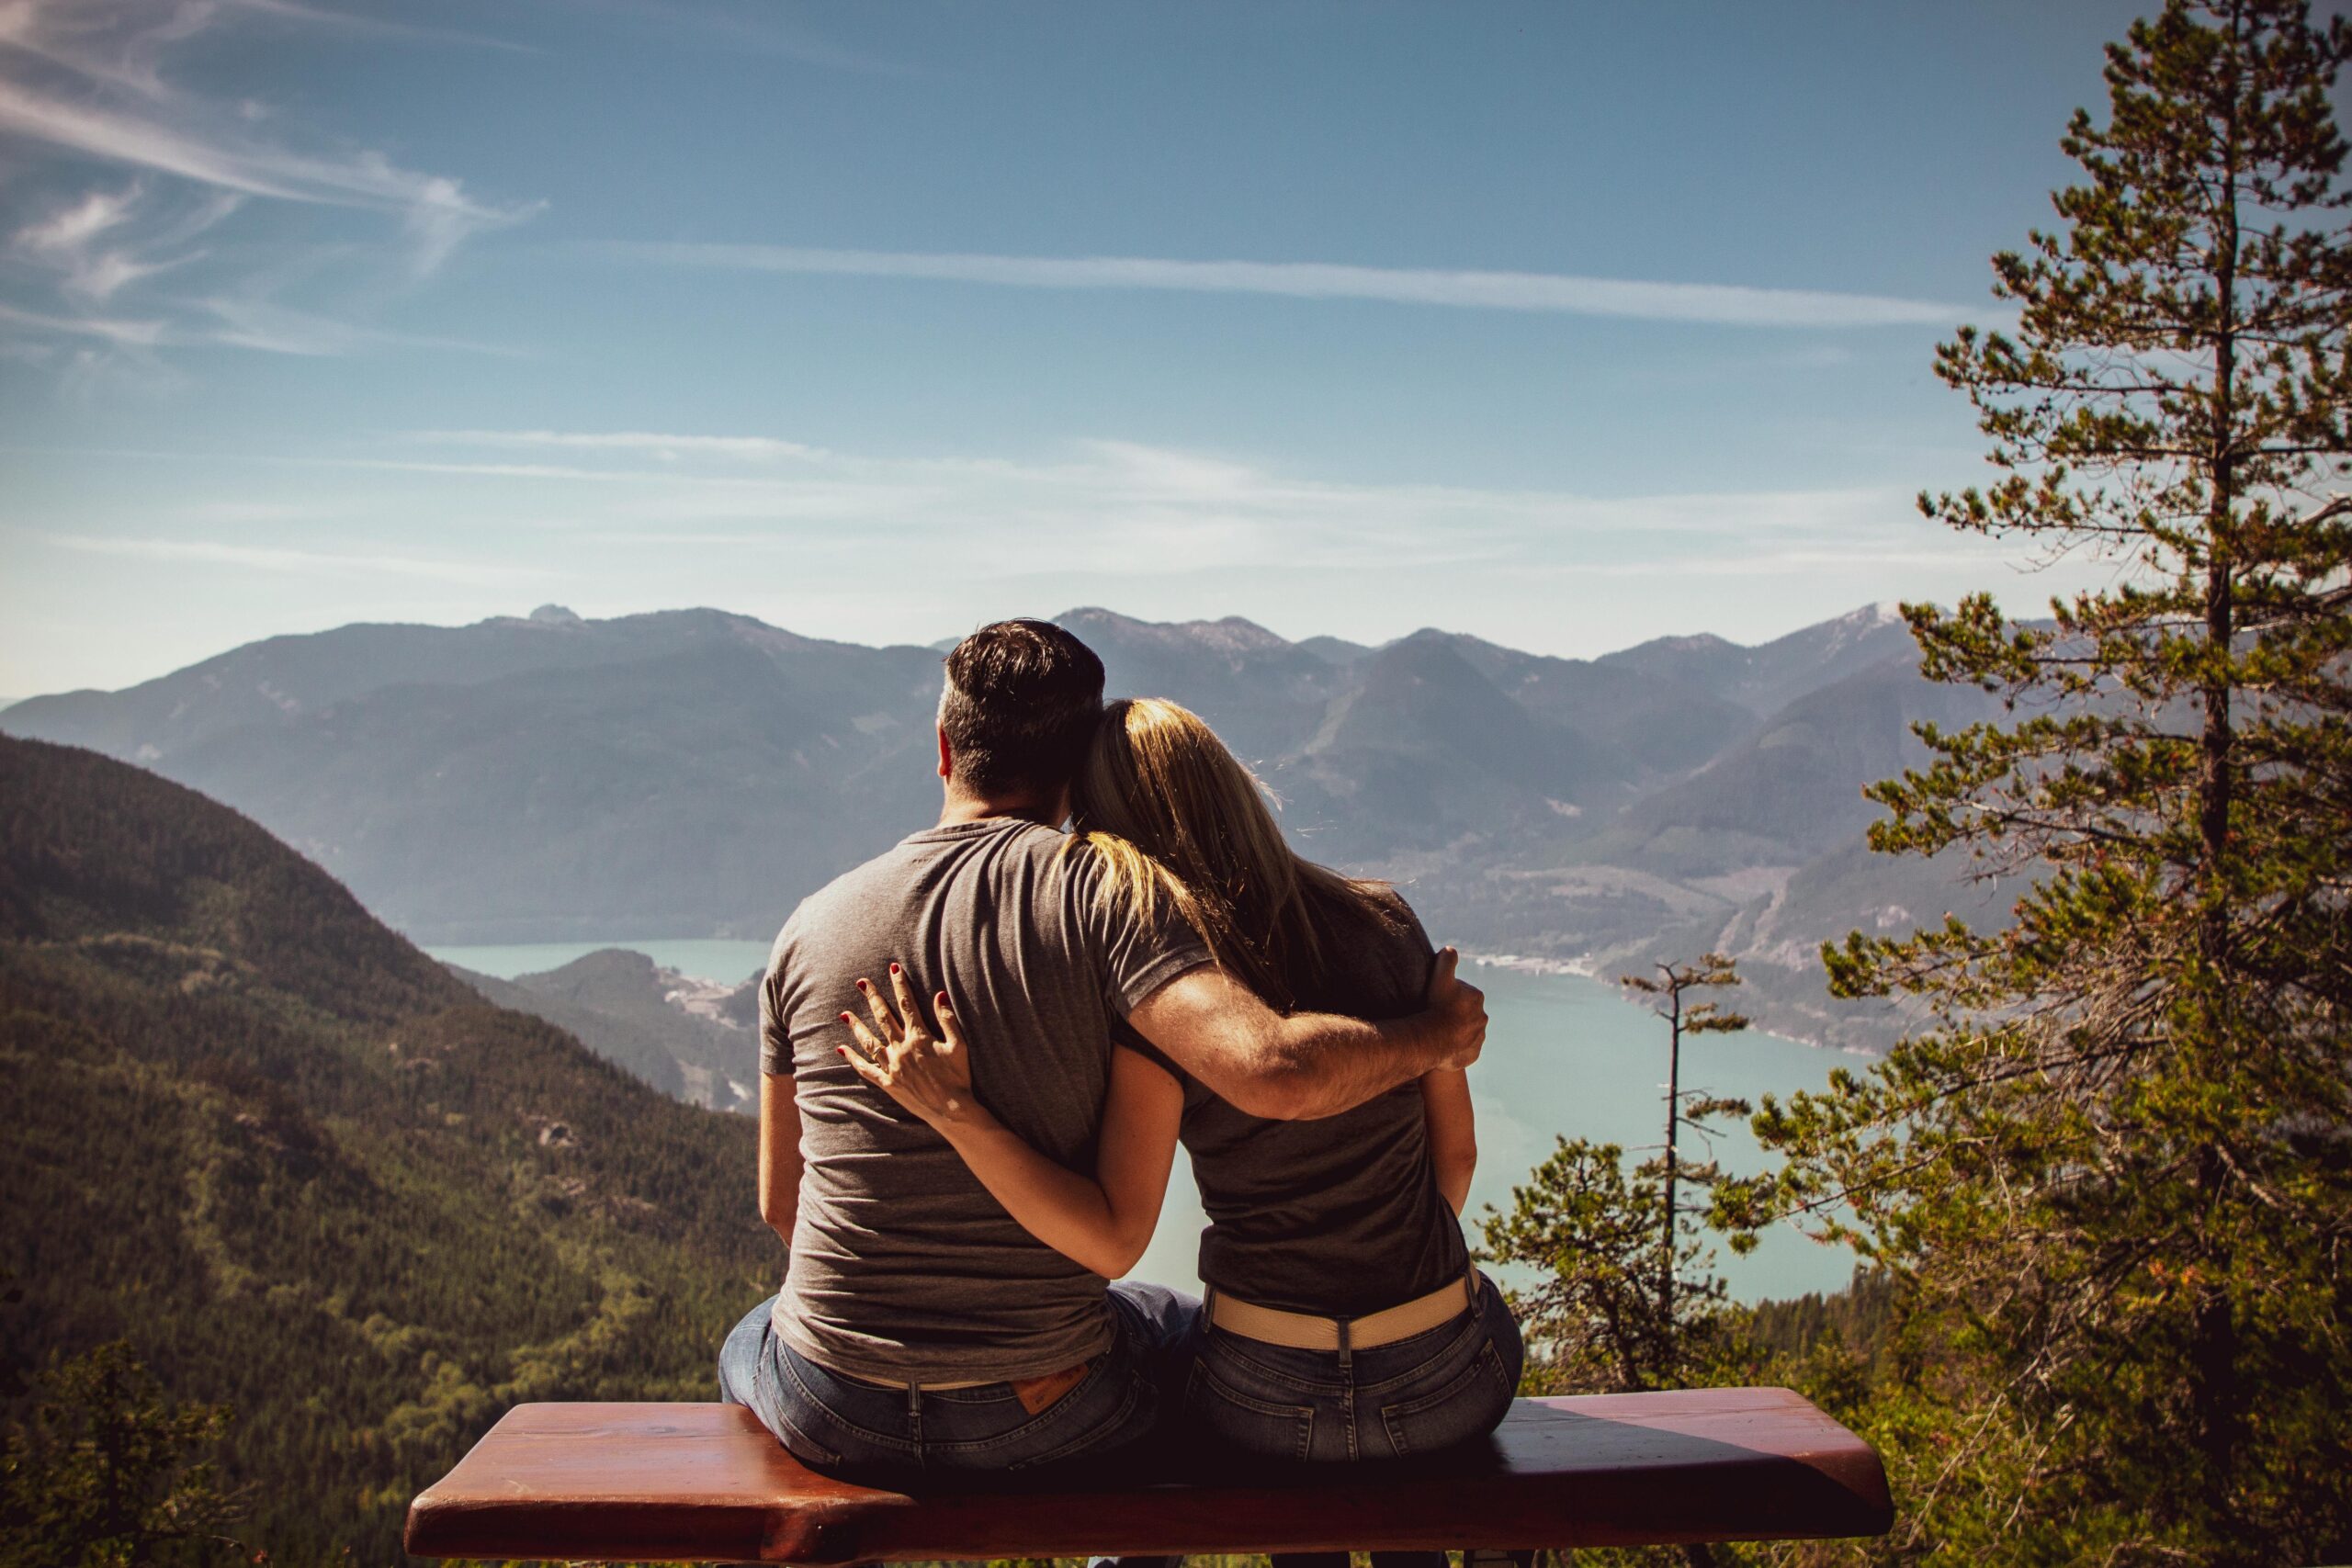 A couple with their backs turned away, looking at a stunning view | Source: Pexels